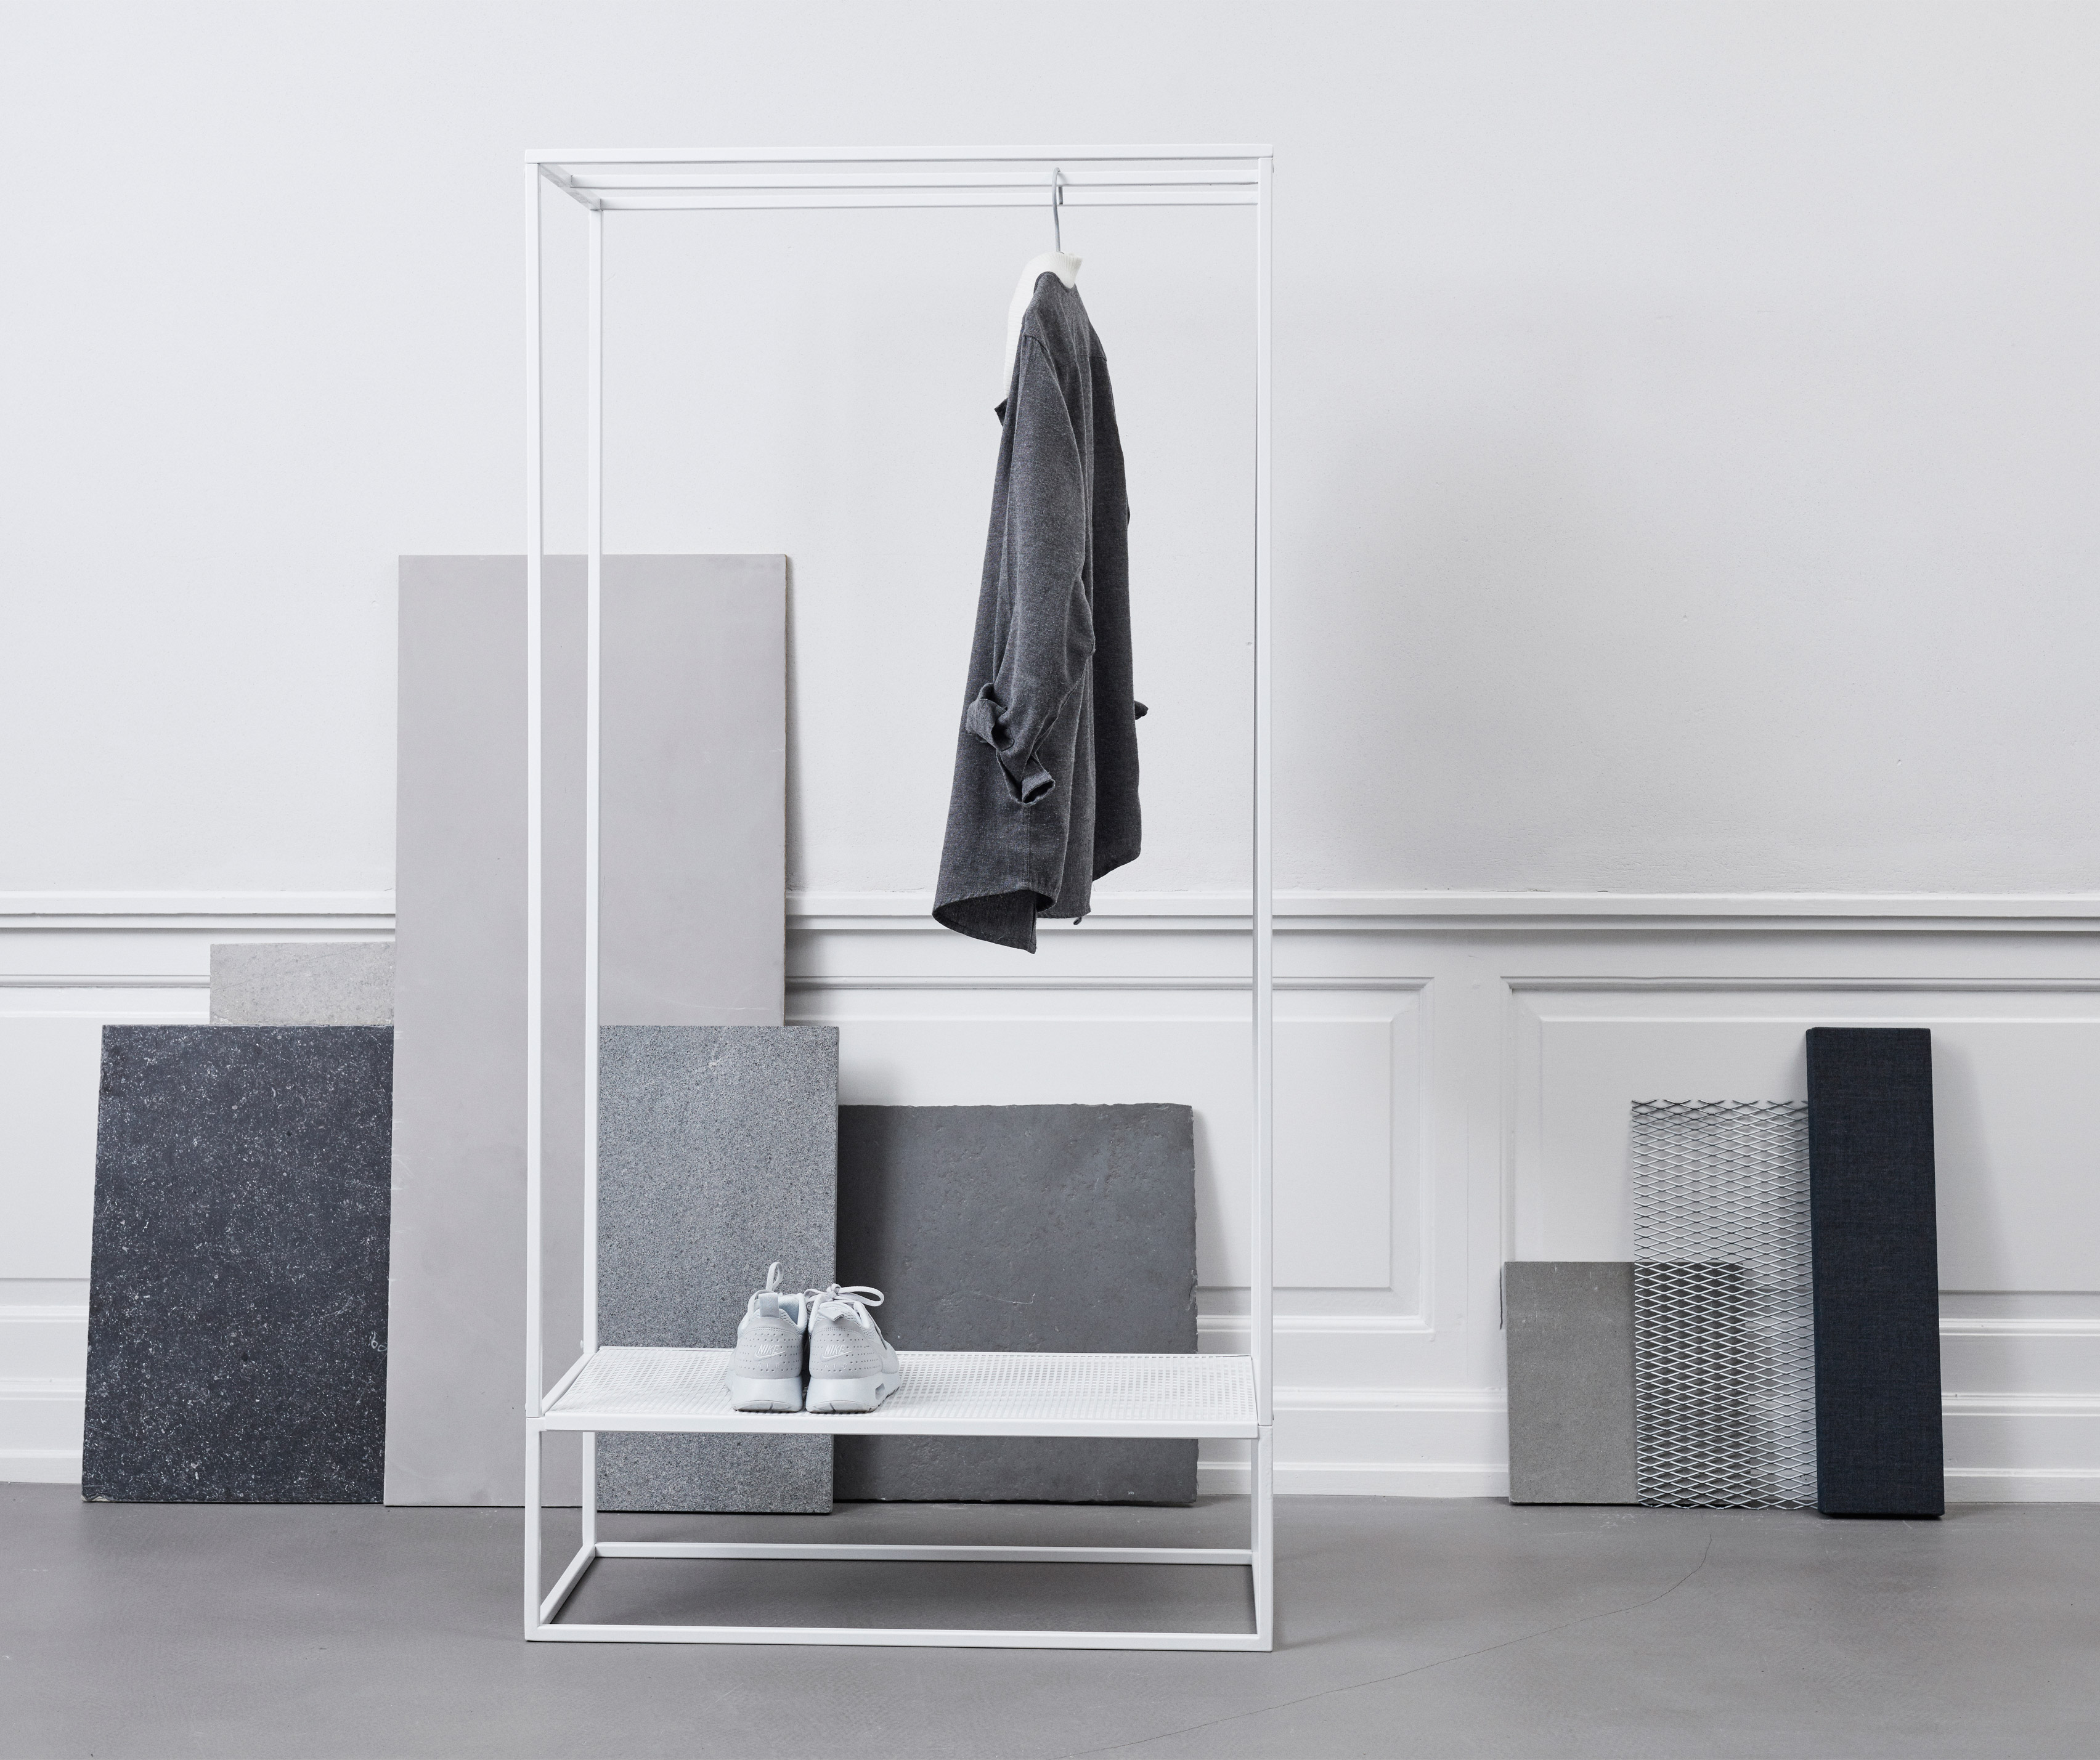 Geometric coat stands and book shelves feature in Kristina Dam's Sculptural Minimalism collection